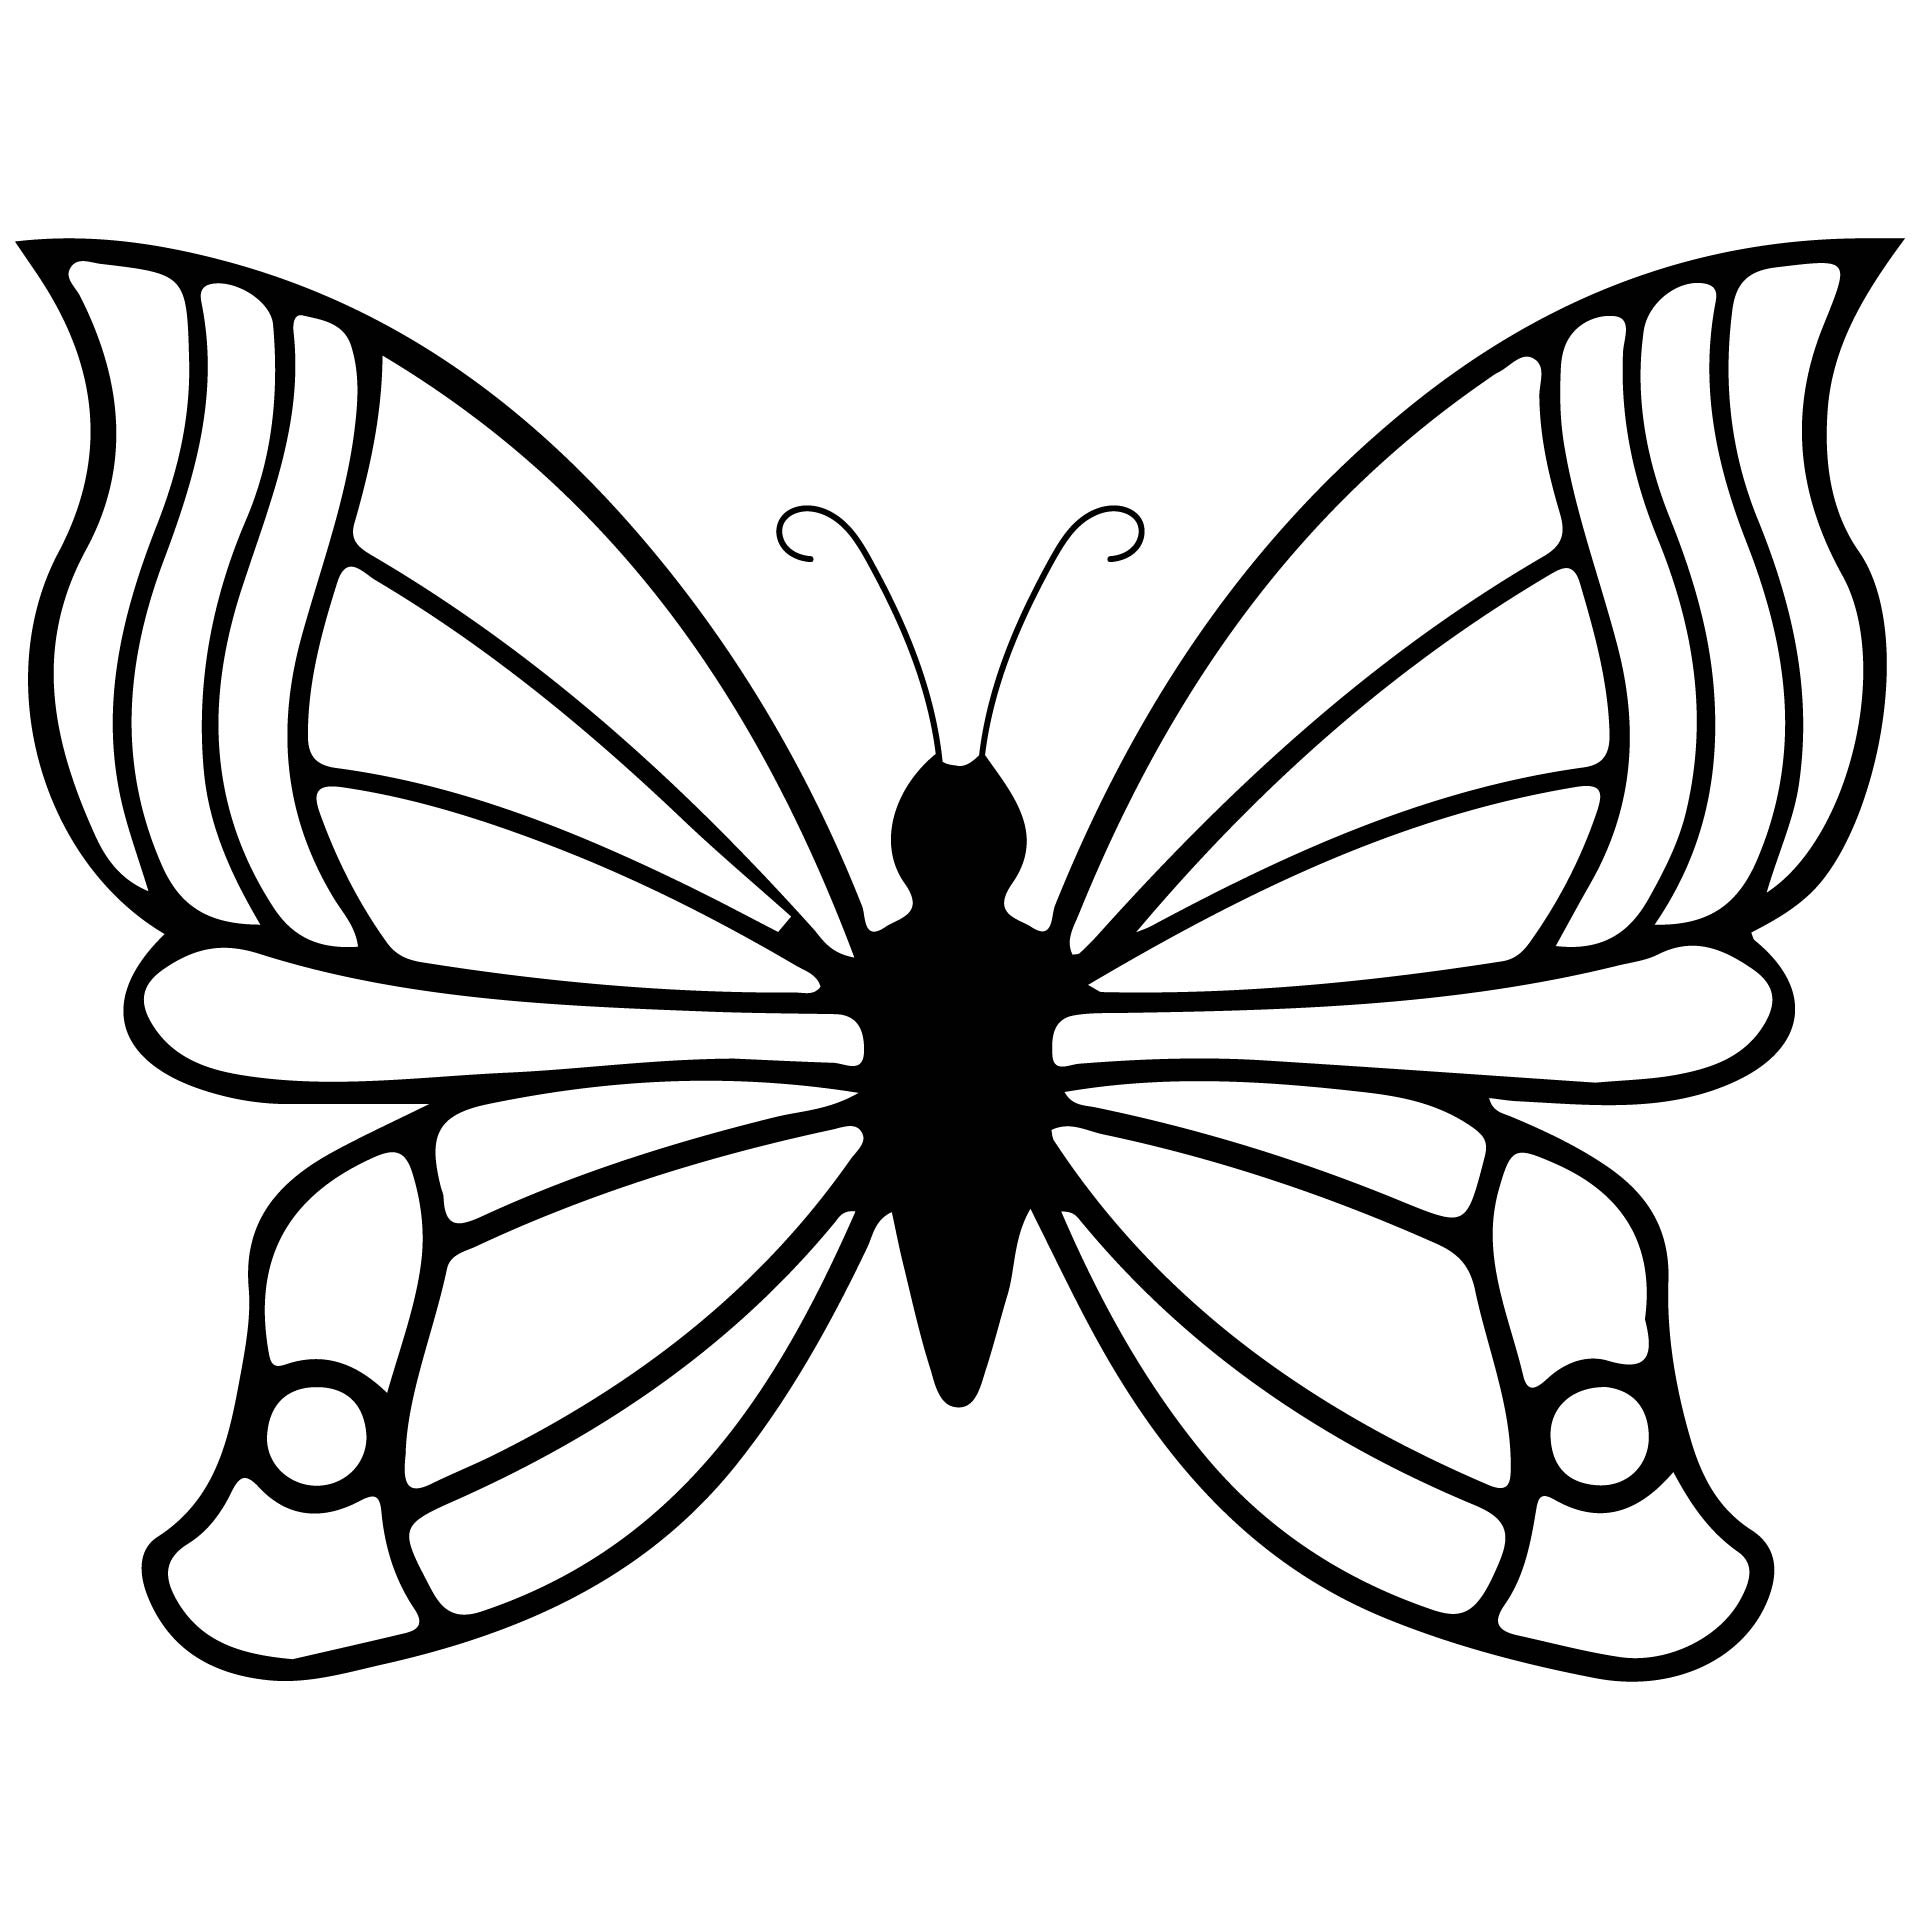 Butterfly Template Printable Free - Templates Printable Download